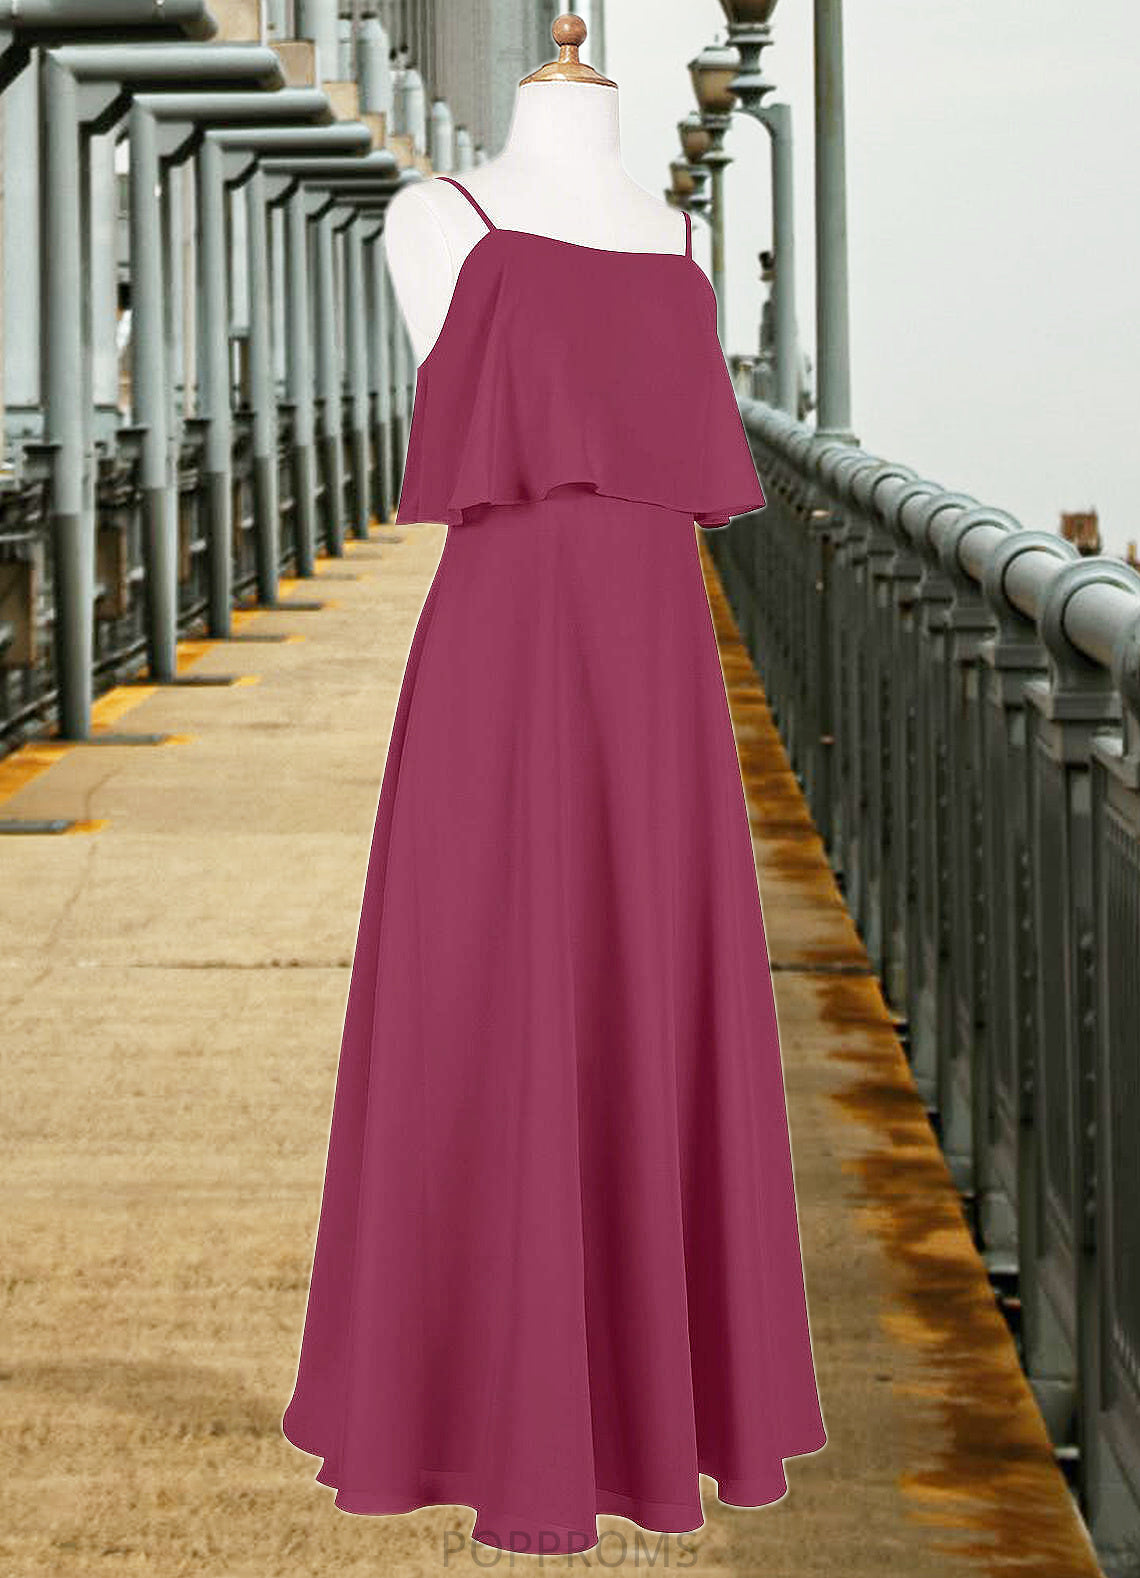 Kali A-Line Ruched Chiffon Floor-Length Junior Bridesmaid Dress Mulberry PP6P0022874